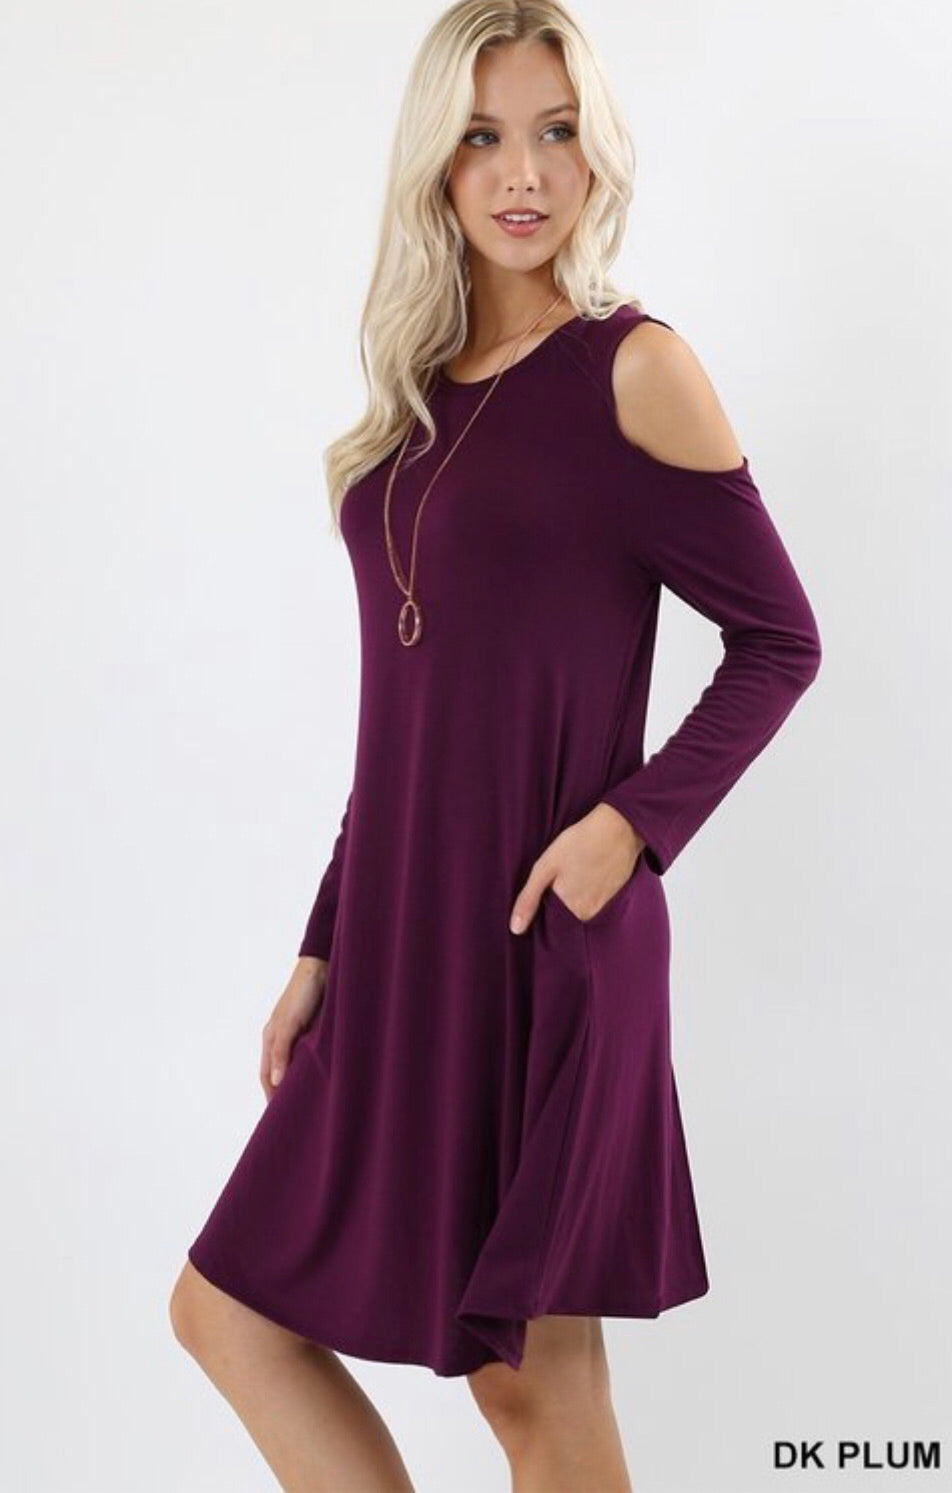 Trish Cold-shoulder Dress - Corinne an Affordable Women's Clothing Boutique in the US USA